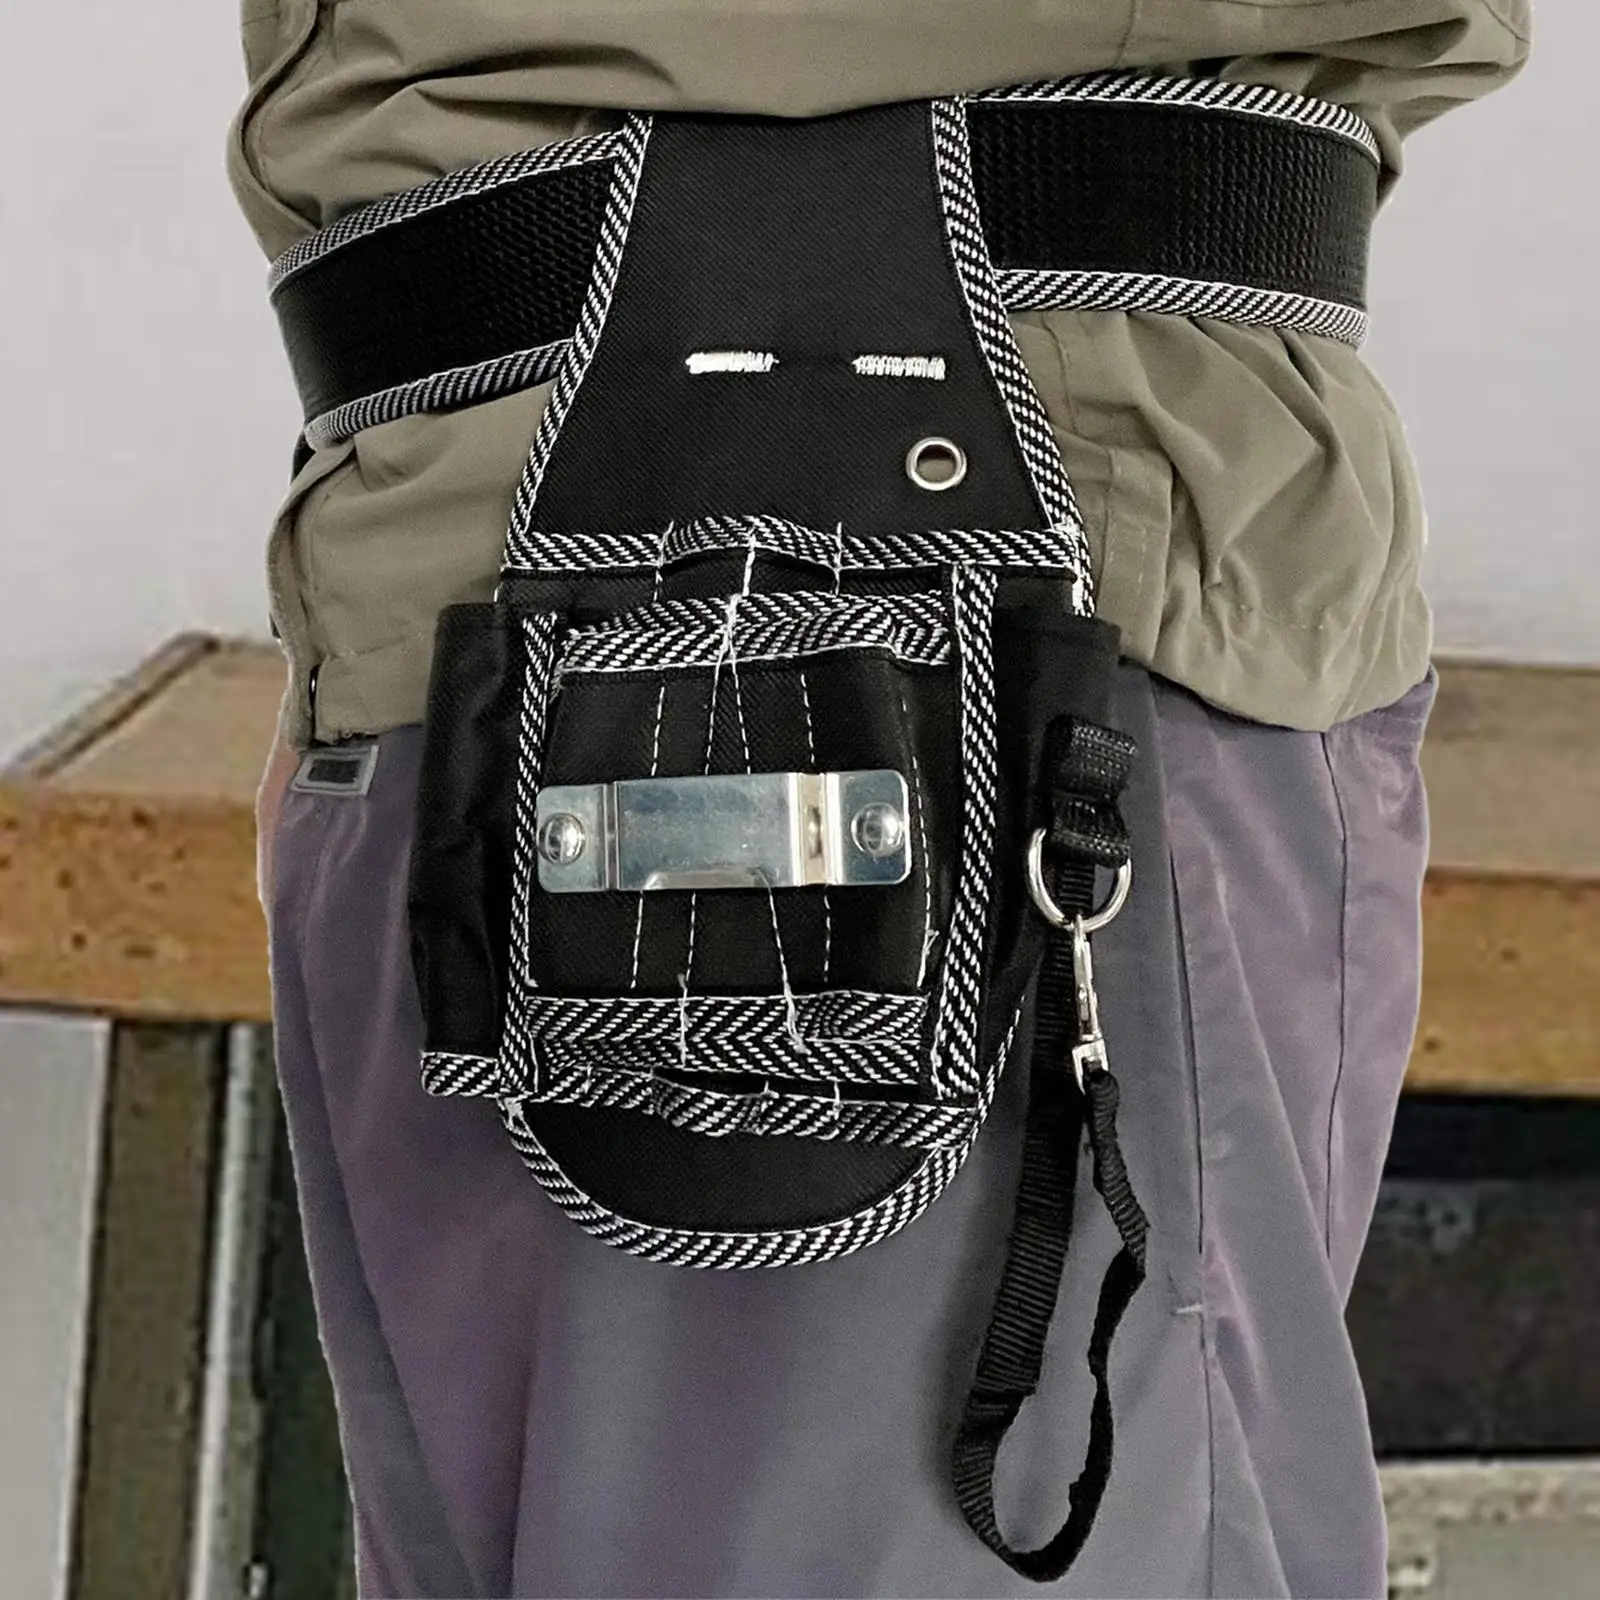 Electrician Waist Tool Bag with Belt Portable Waist Tools Bag Pocket for Carpentry Woodworking Drywall Workers Plumbers Handyman